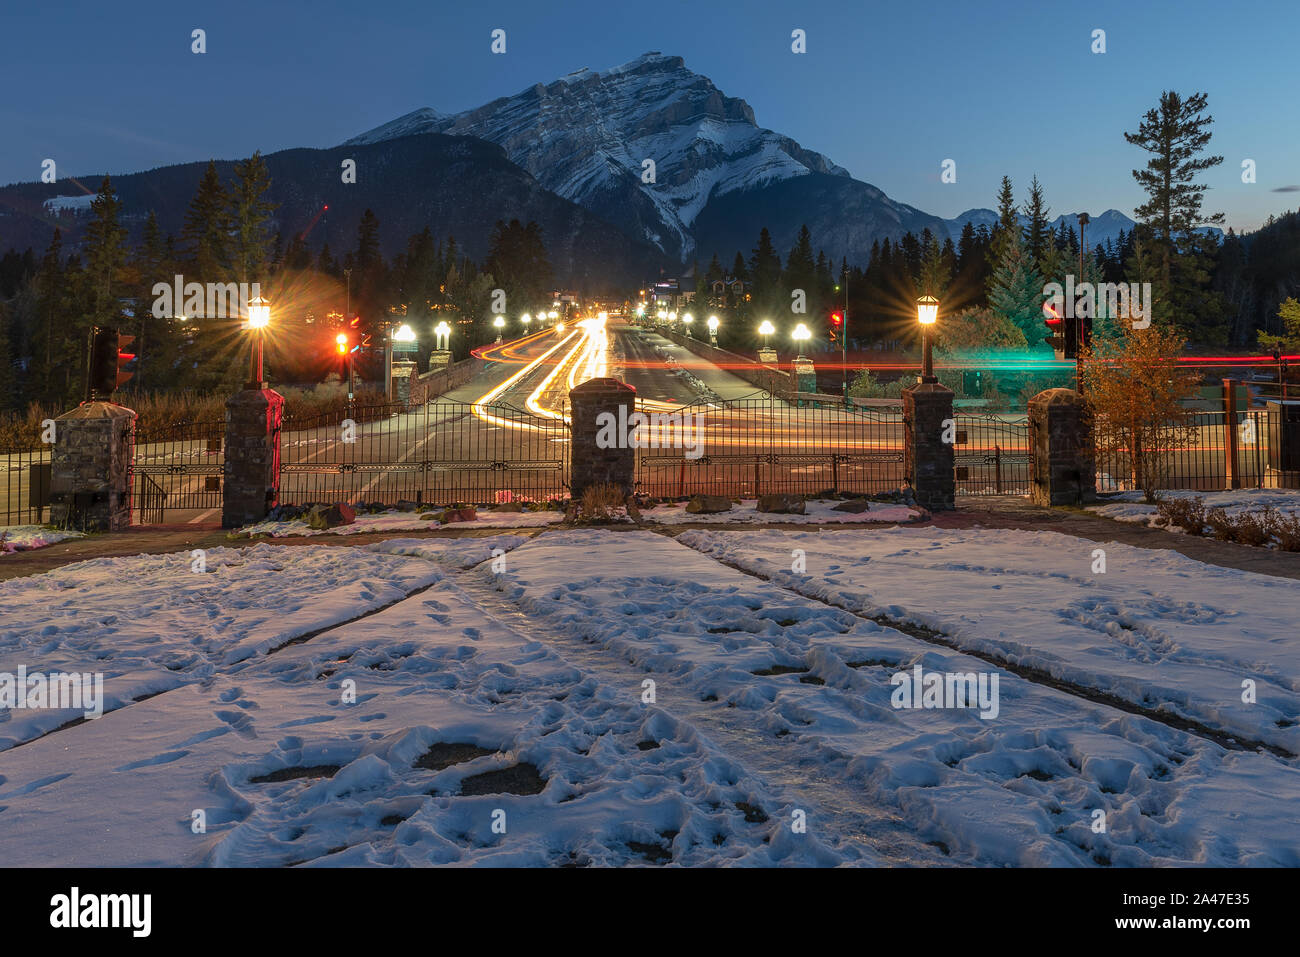 Banff Avenue in the Town of Banff, Canada Stock Photo